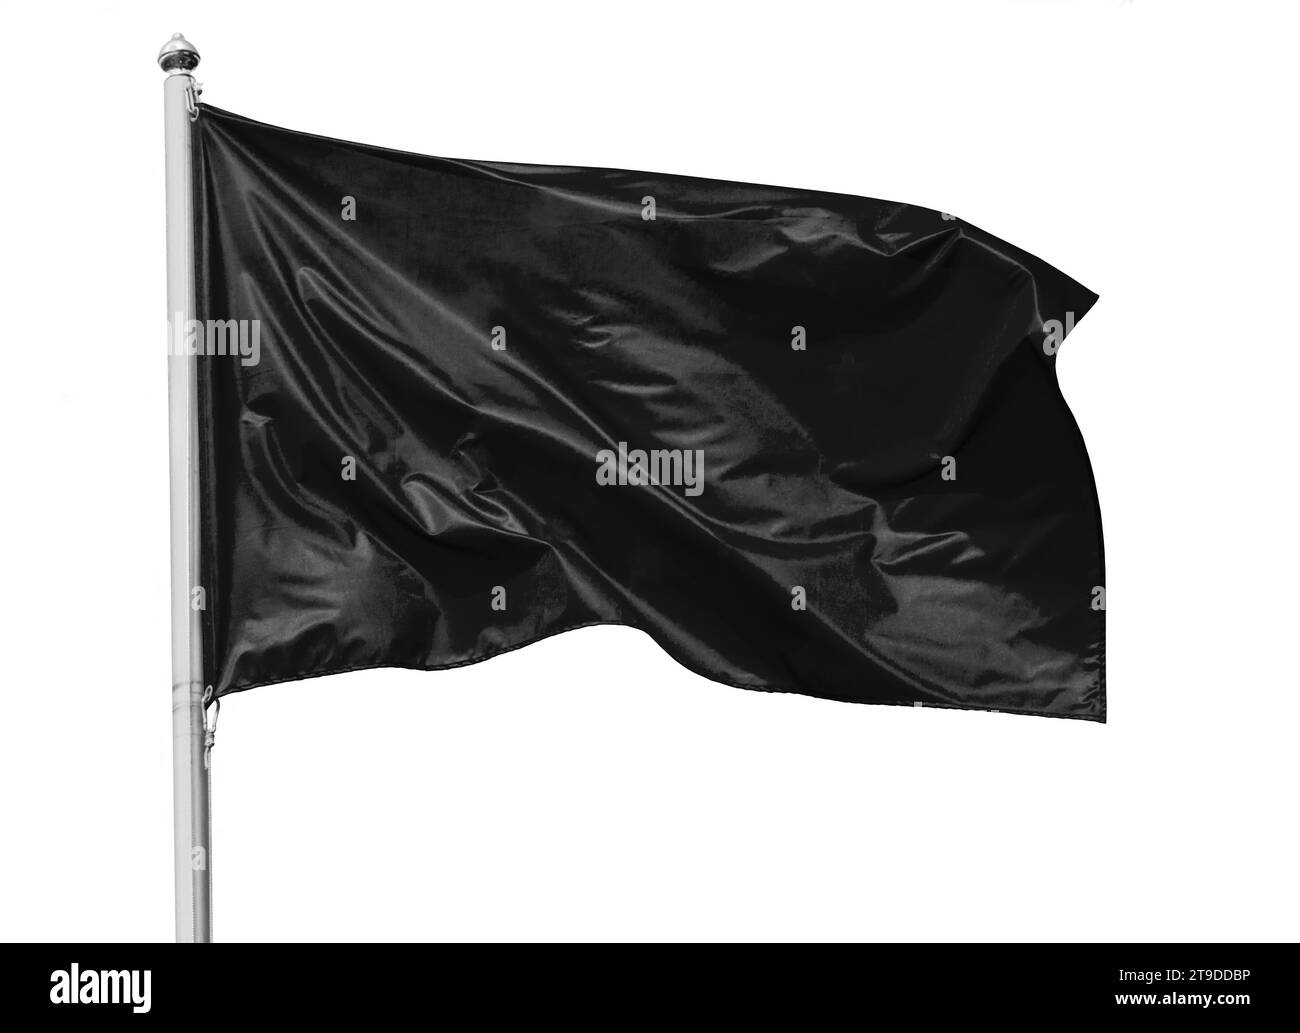 Black flag waving in the wind on flagpole, isolated on white background, closeup Stock Photo